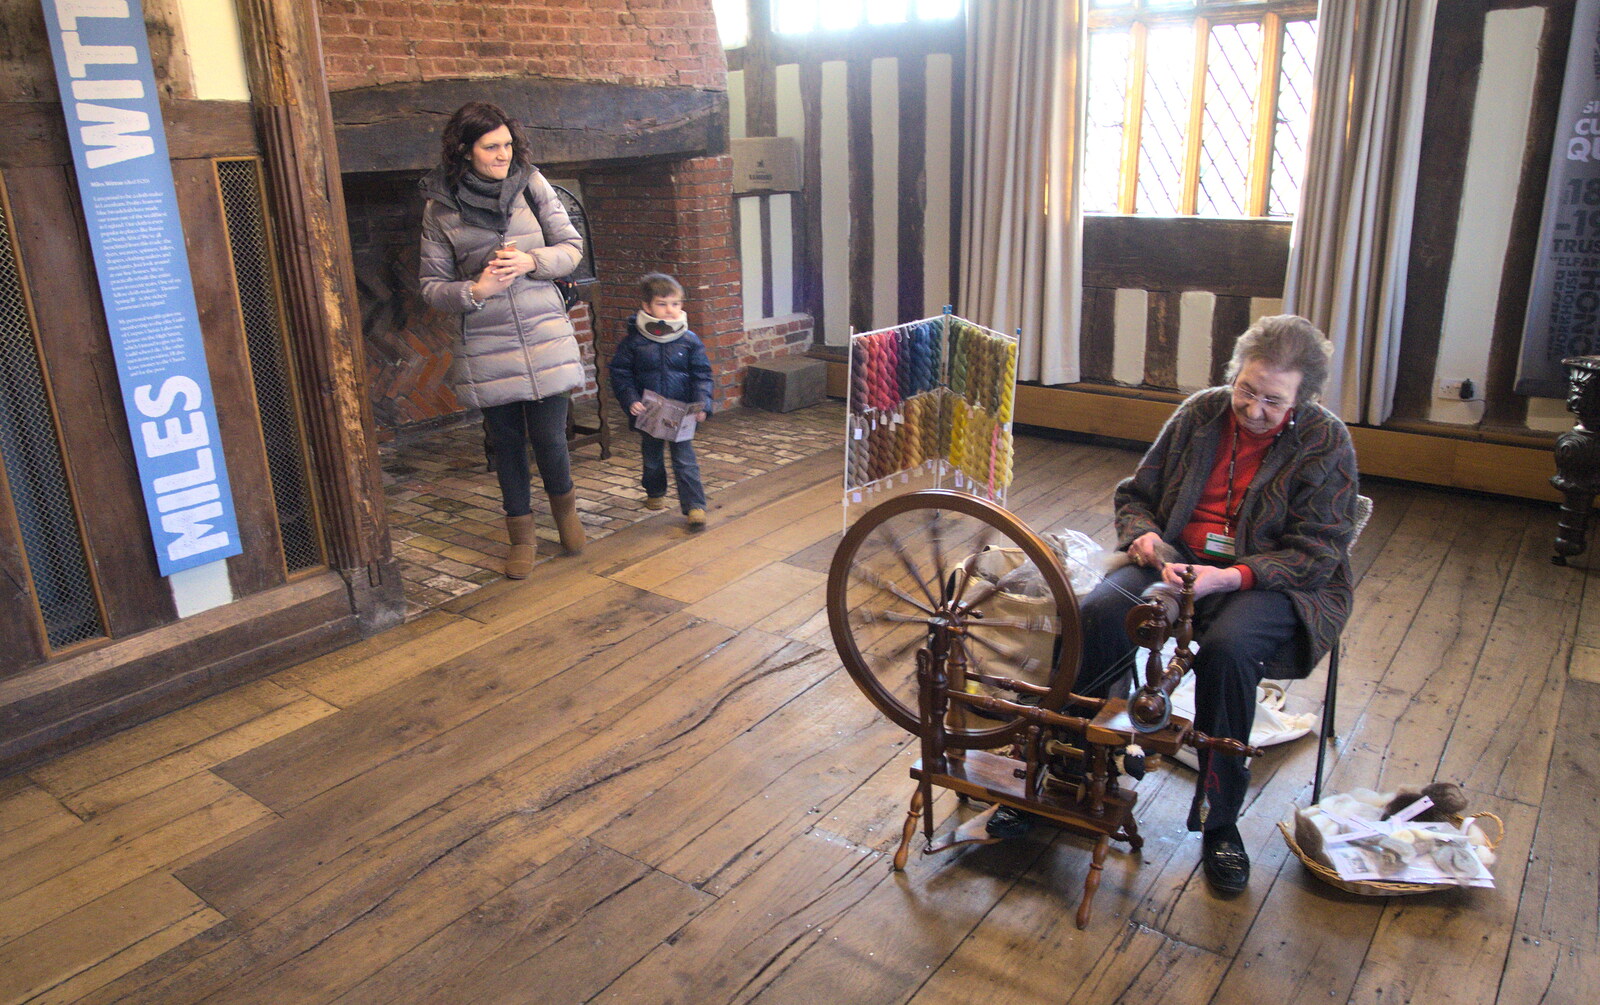 Some wool is spun from A Day in Lavenham, Suffolk - 22nd January 2017